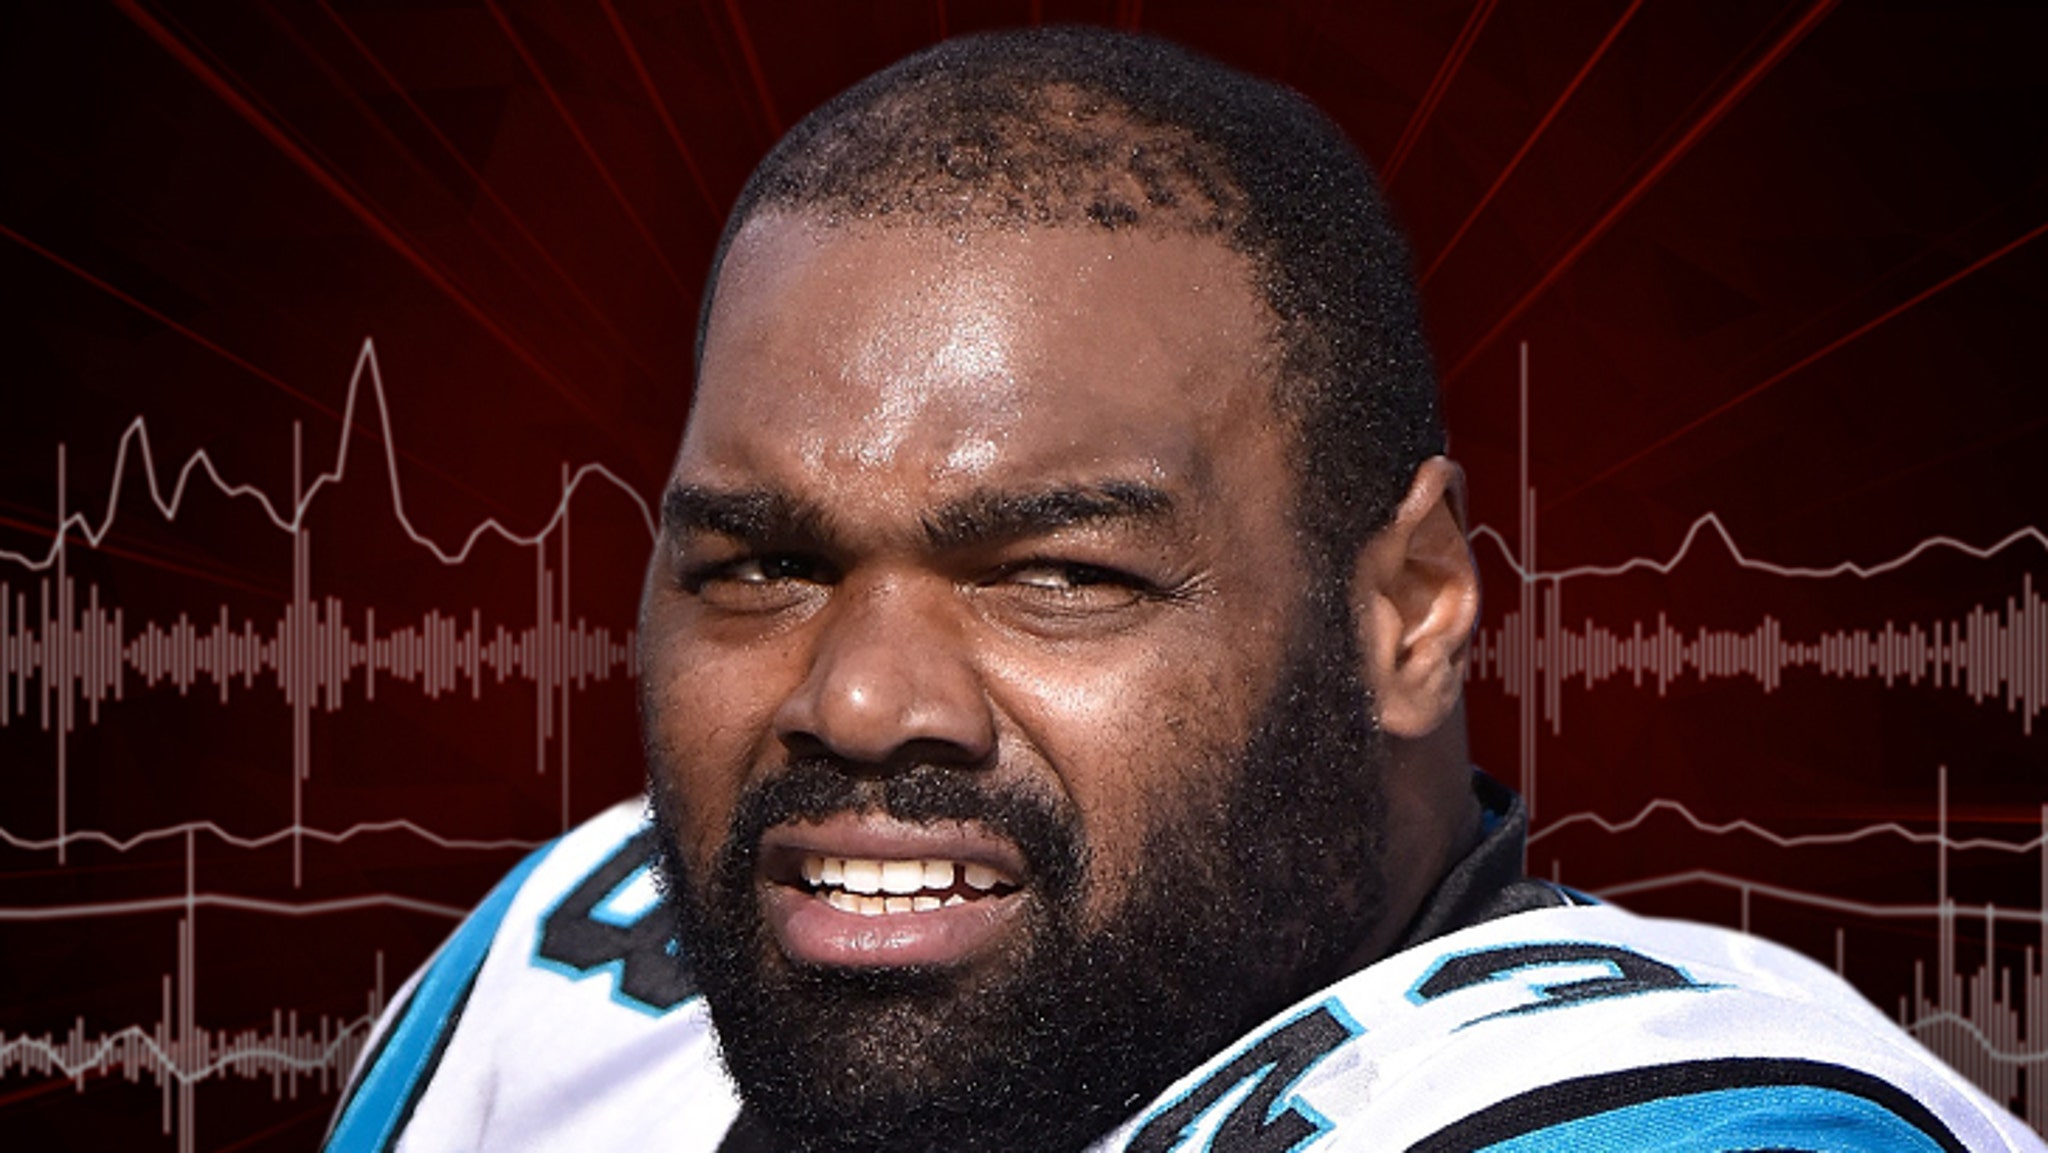 Michael Oher Frantic 911 Call: 'He's Attacking Me Right Now!'